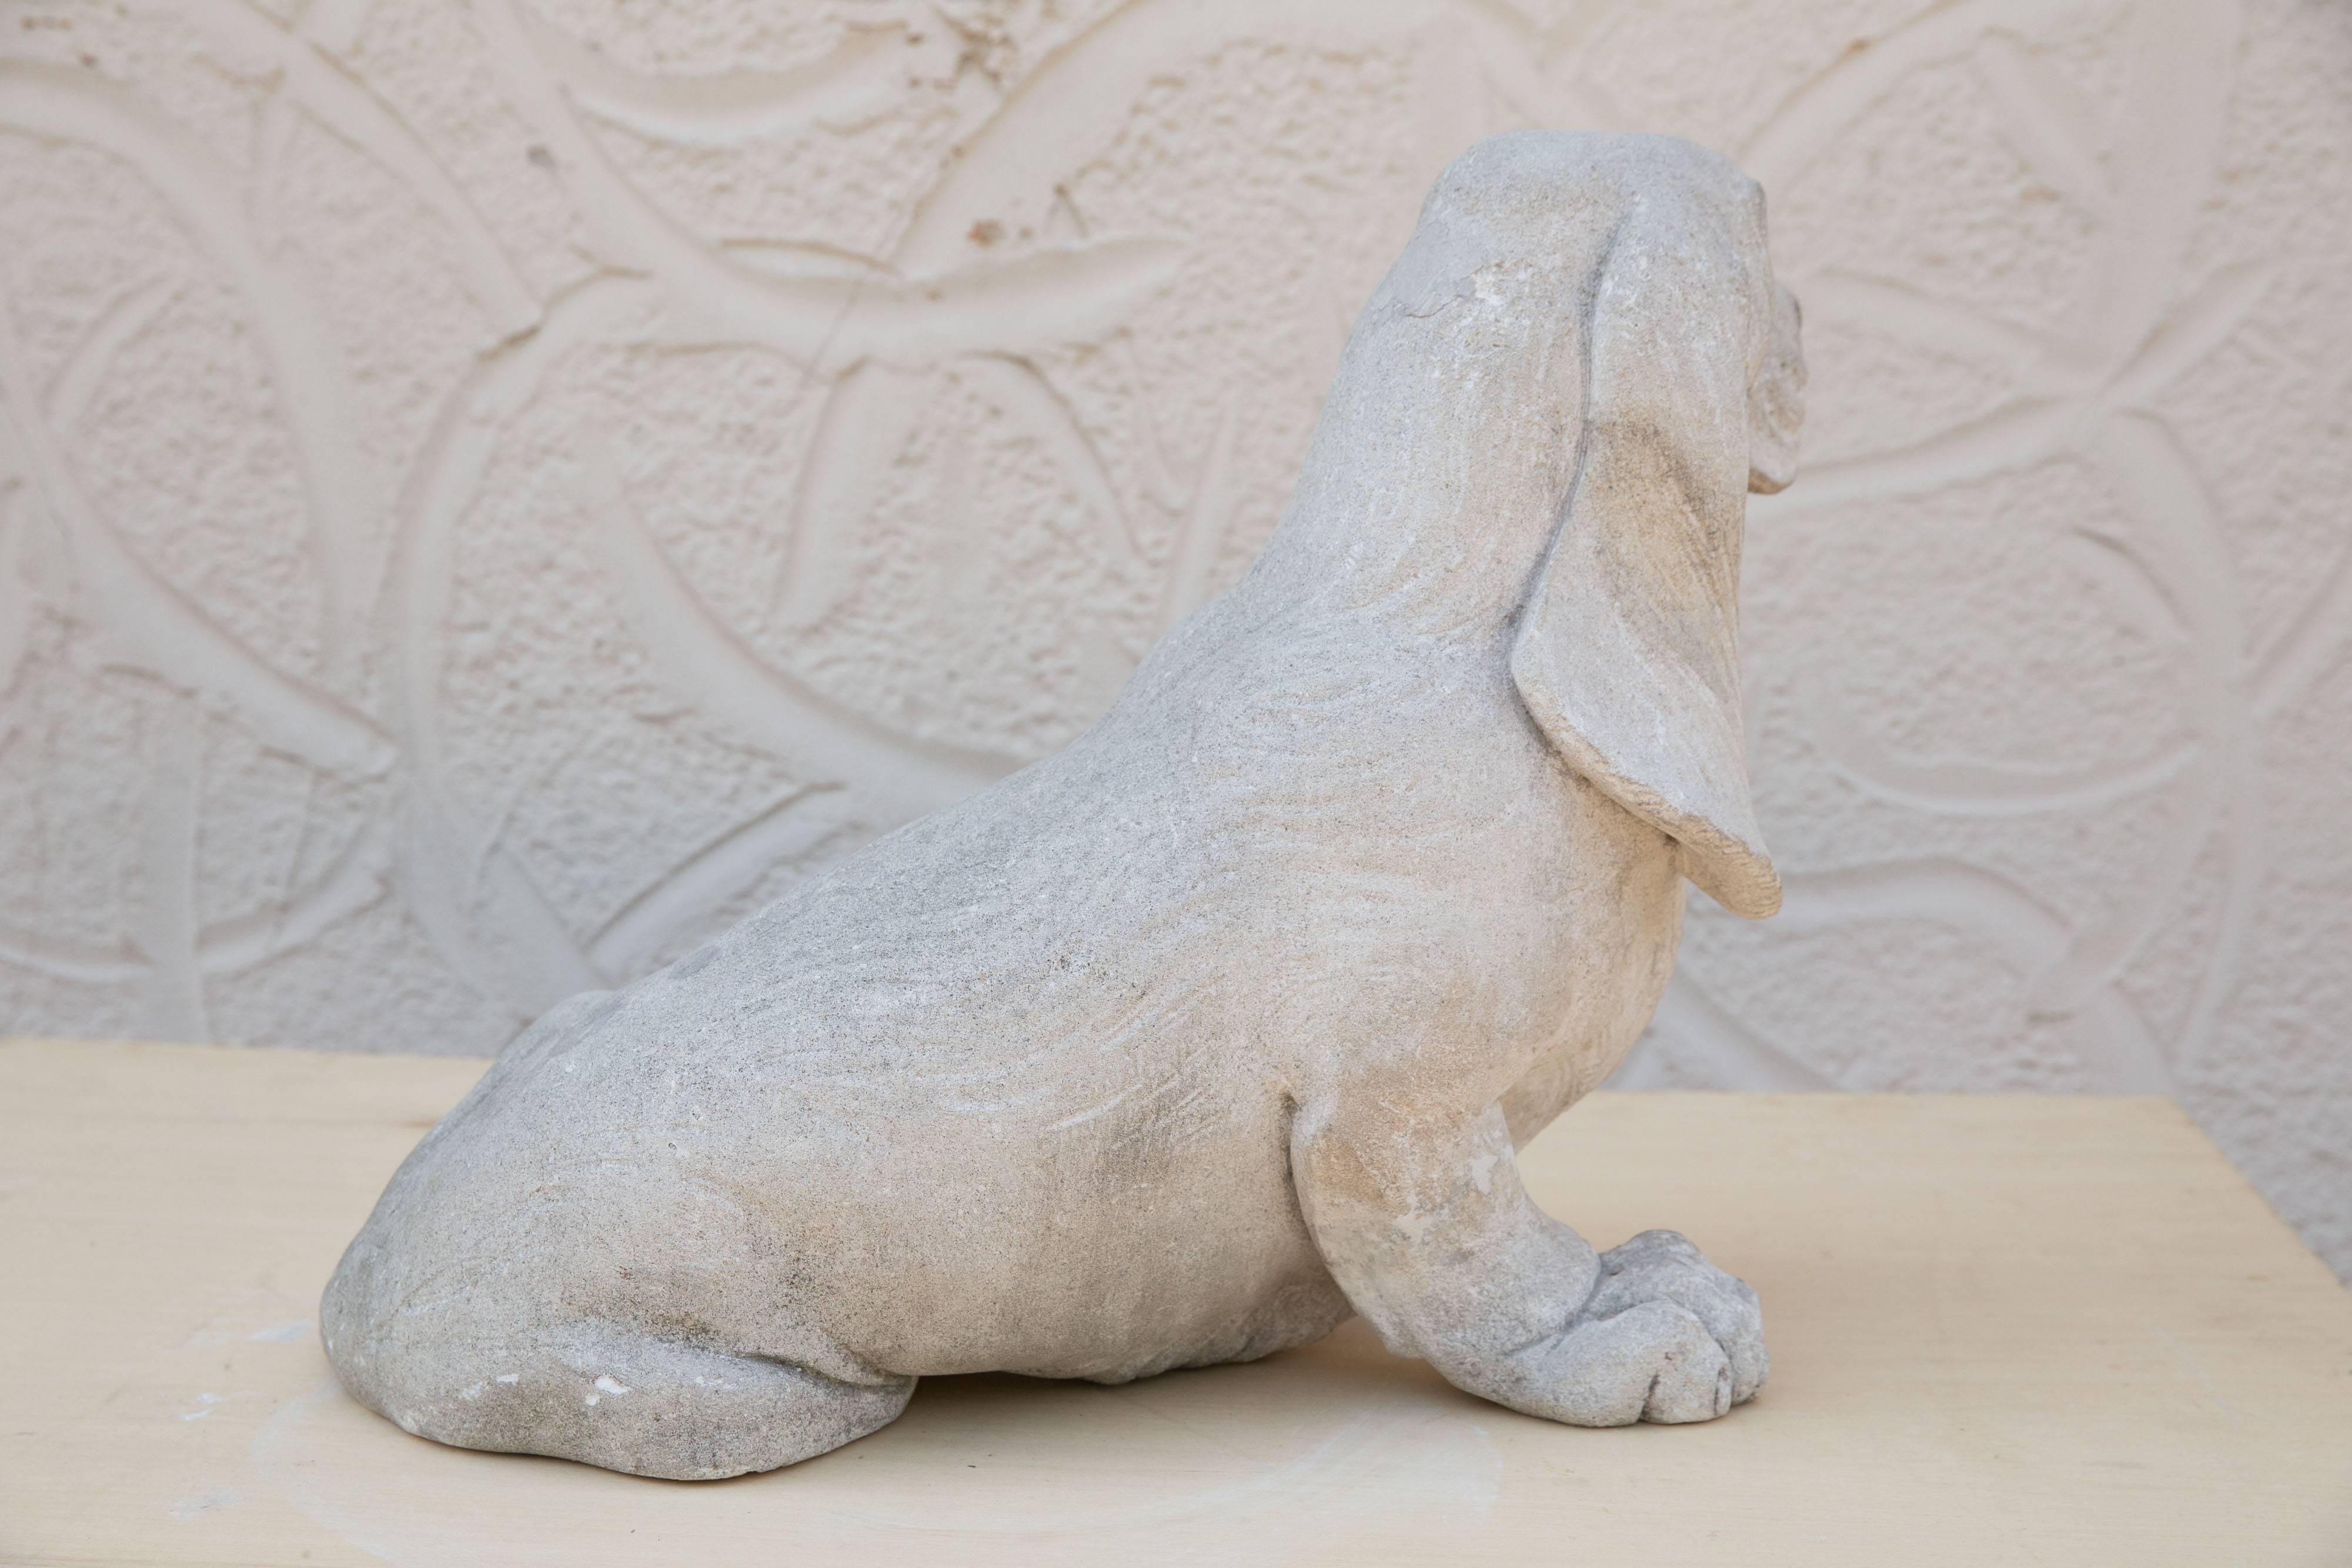 A concrete statue of a proud and lovable basset hound to stand guard over your house or garden. Wonderful details.